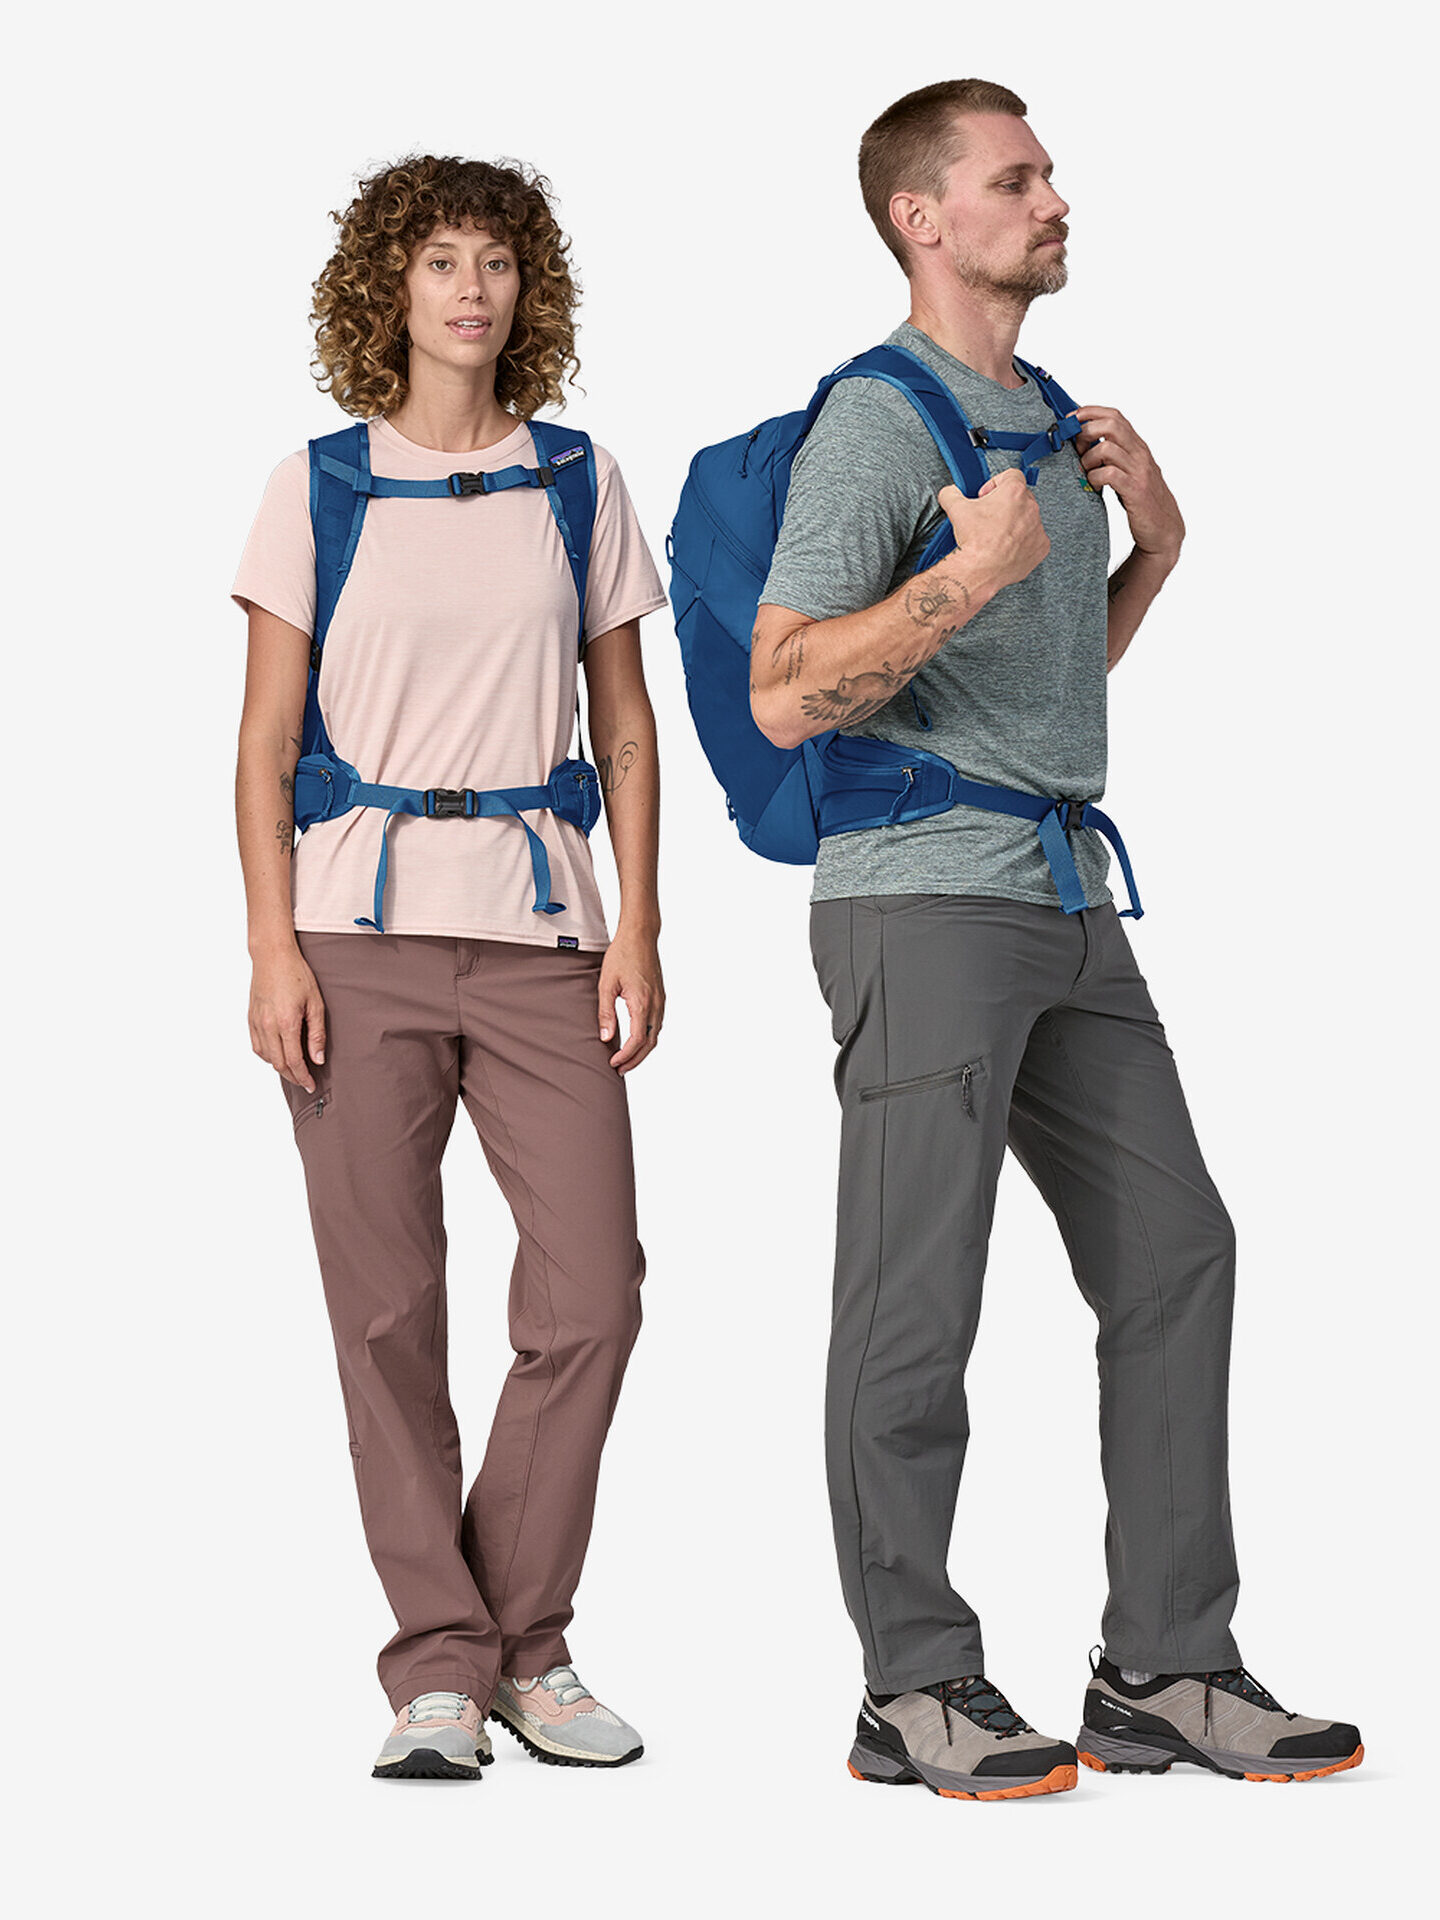 Two hikers wearing technical clothing and backpacks standing back-to-back, looking towards opposite directions.